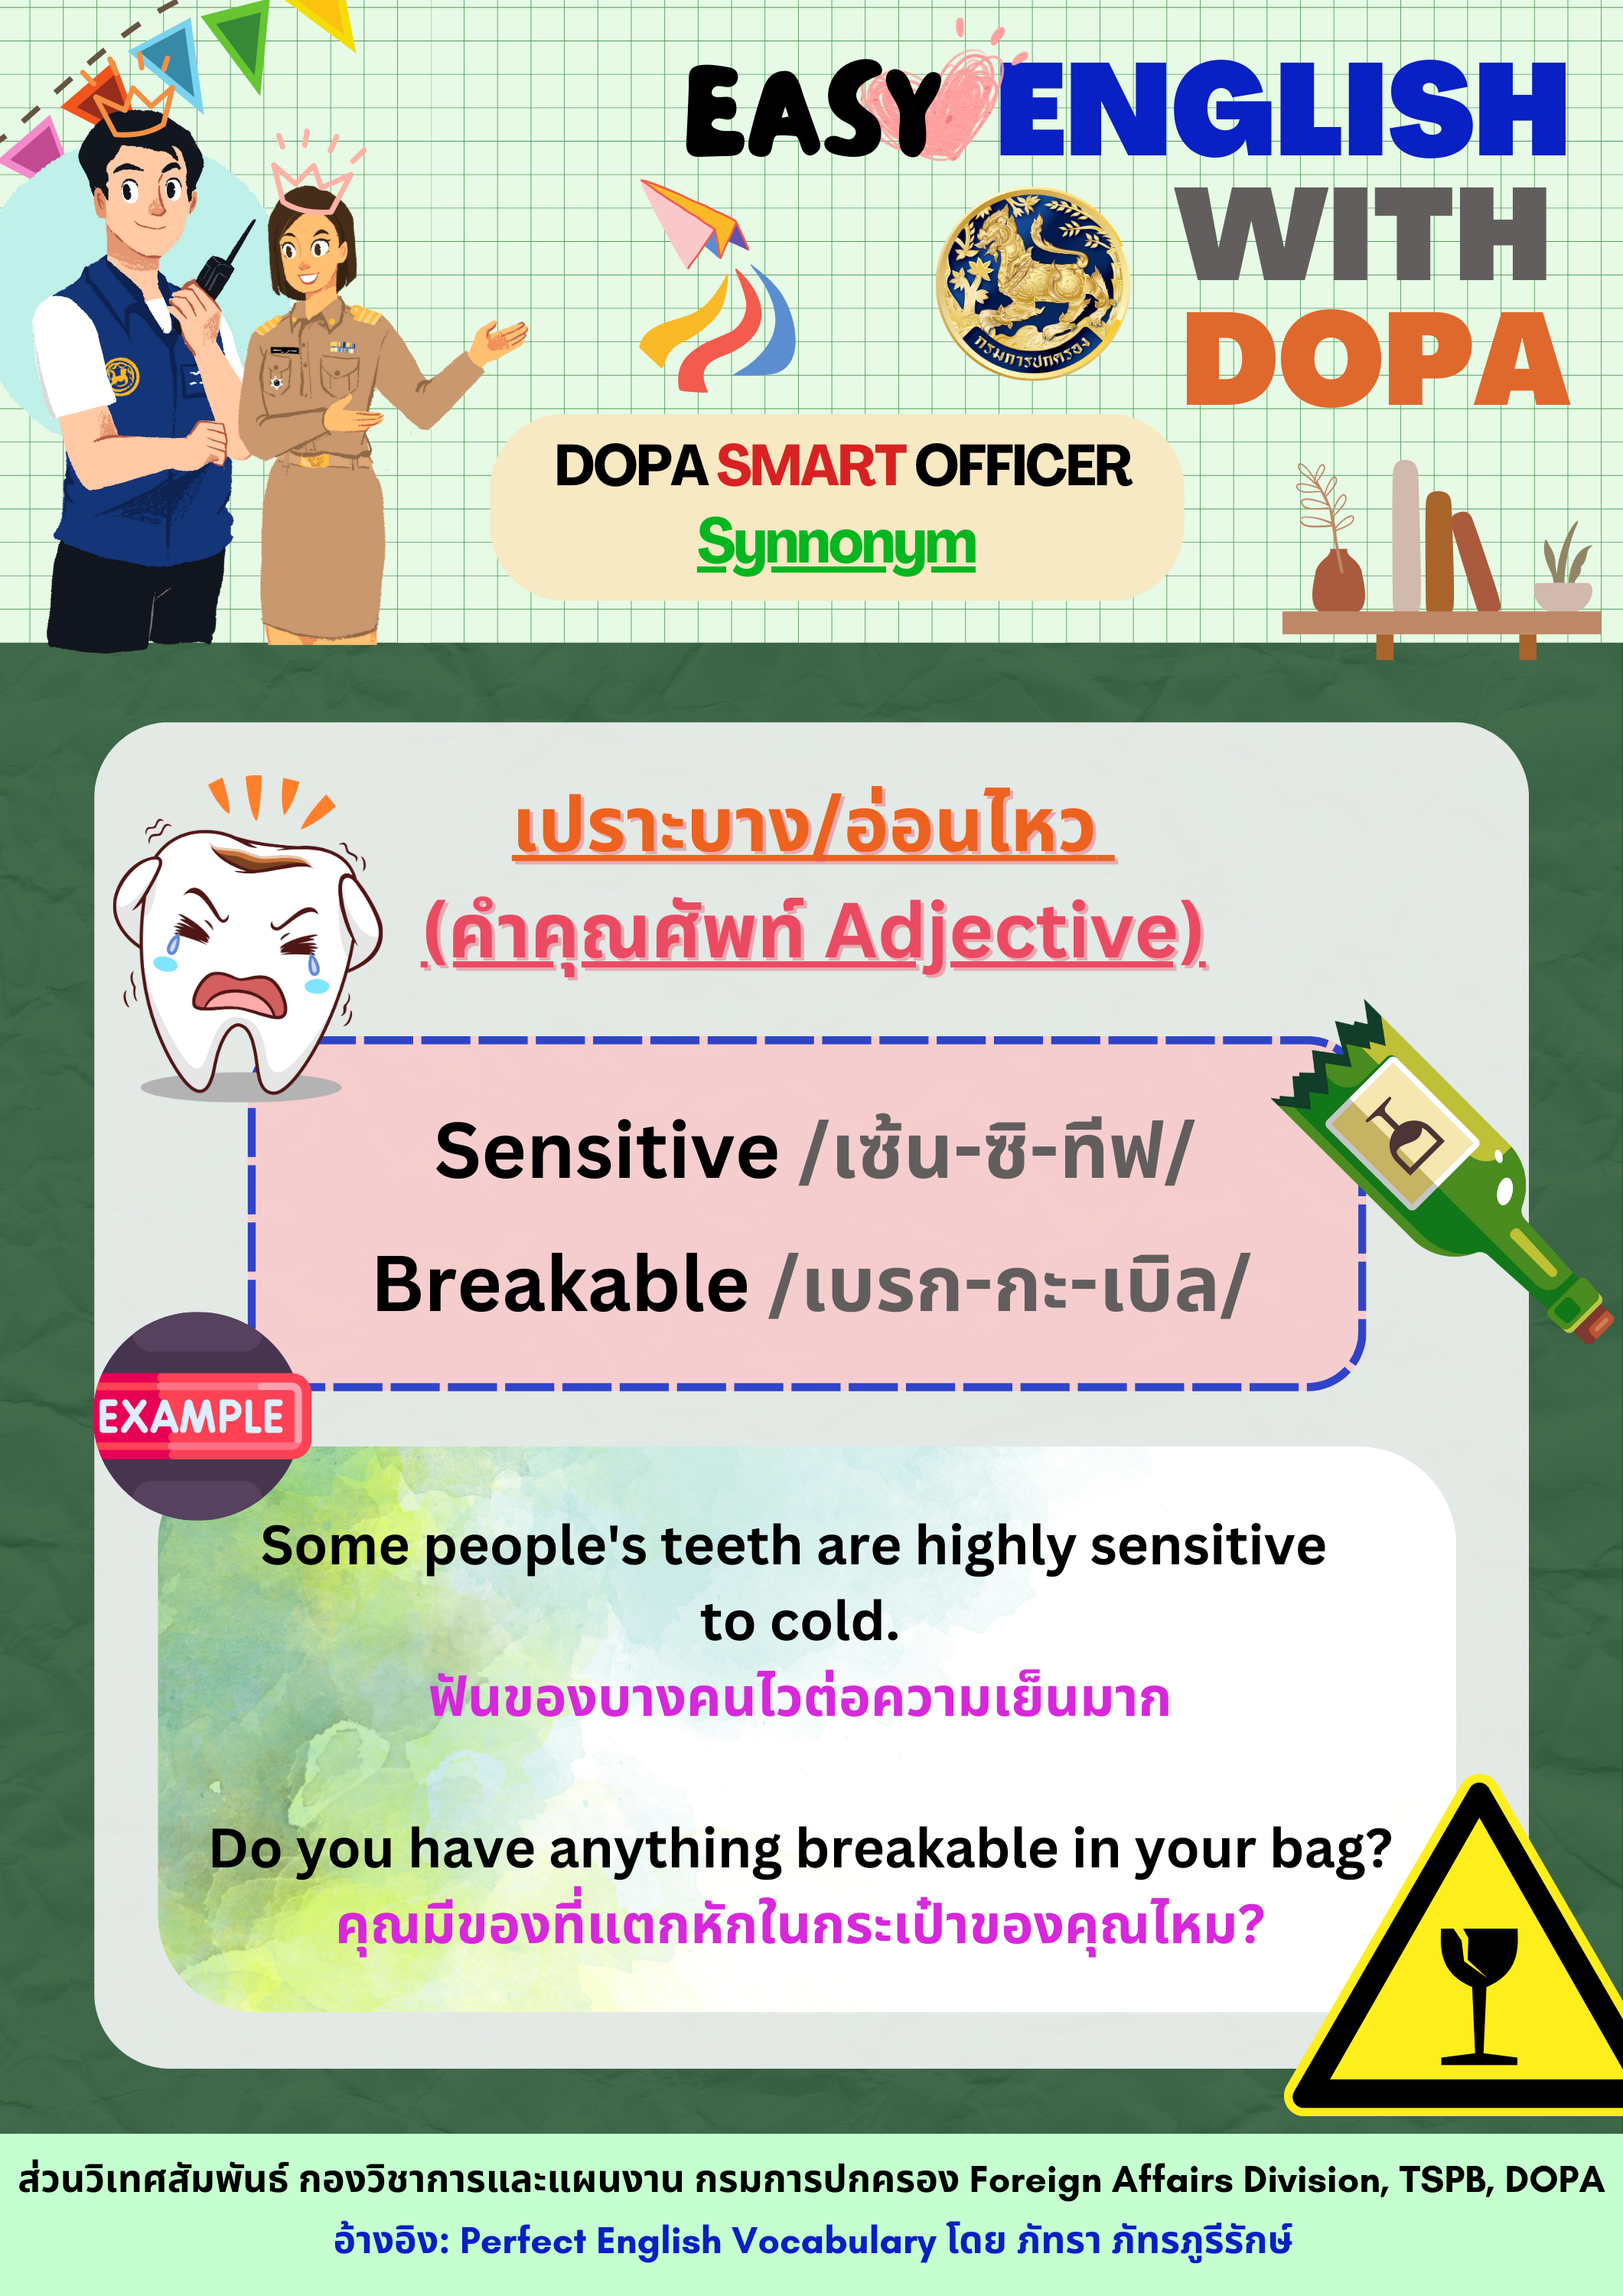 Easy English with DOPA page2